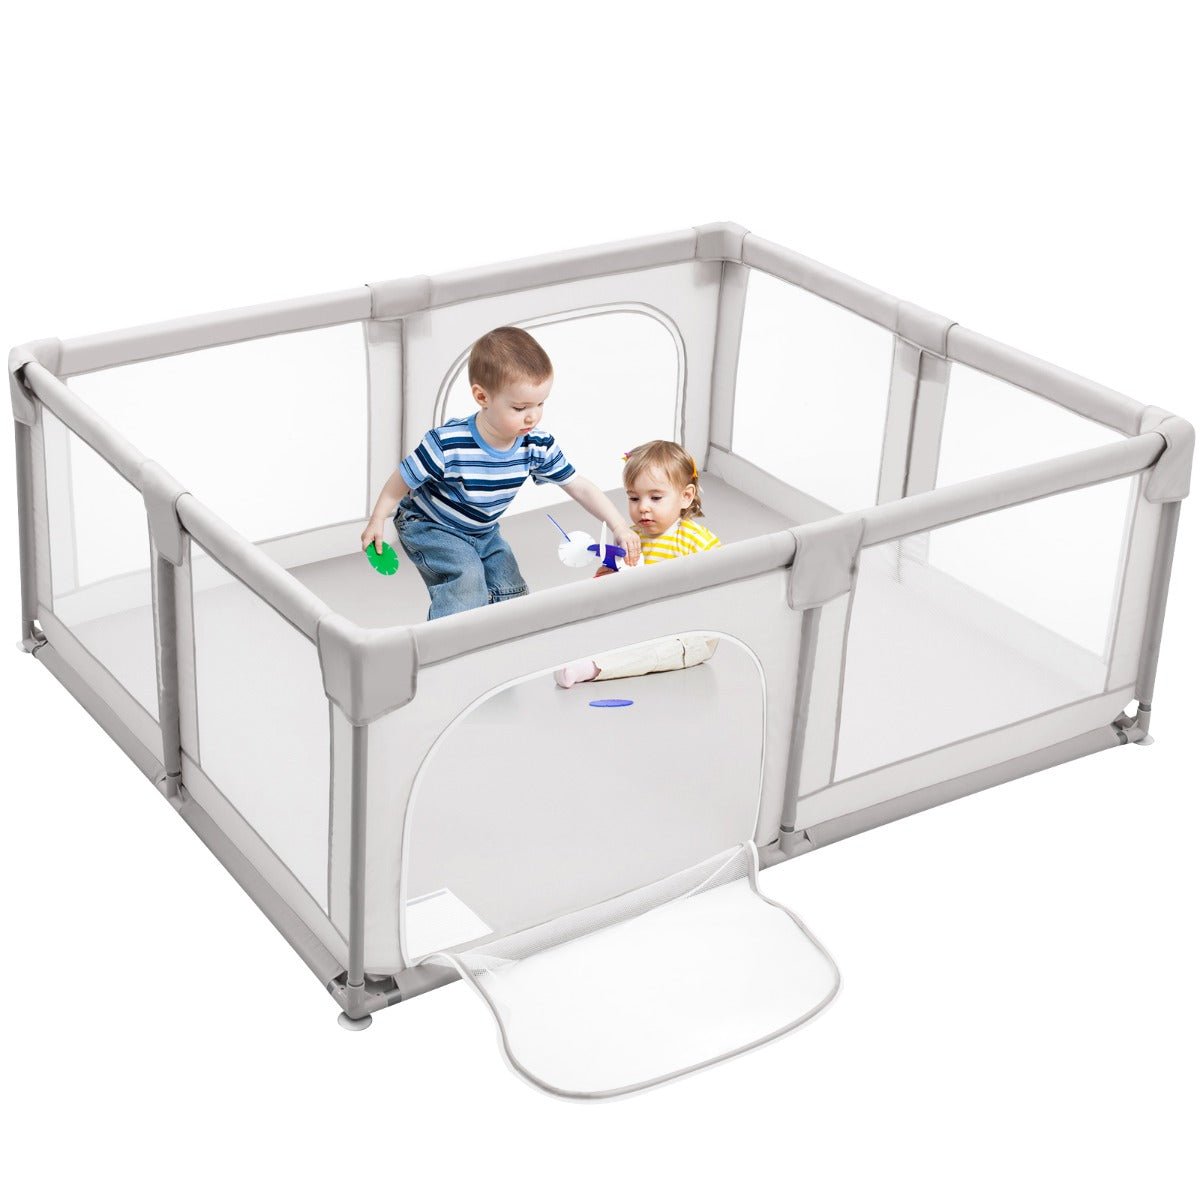 Gray Infant Safety Play Yard with Interactive Features